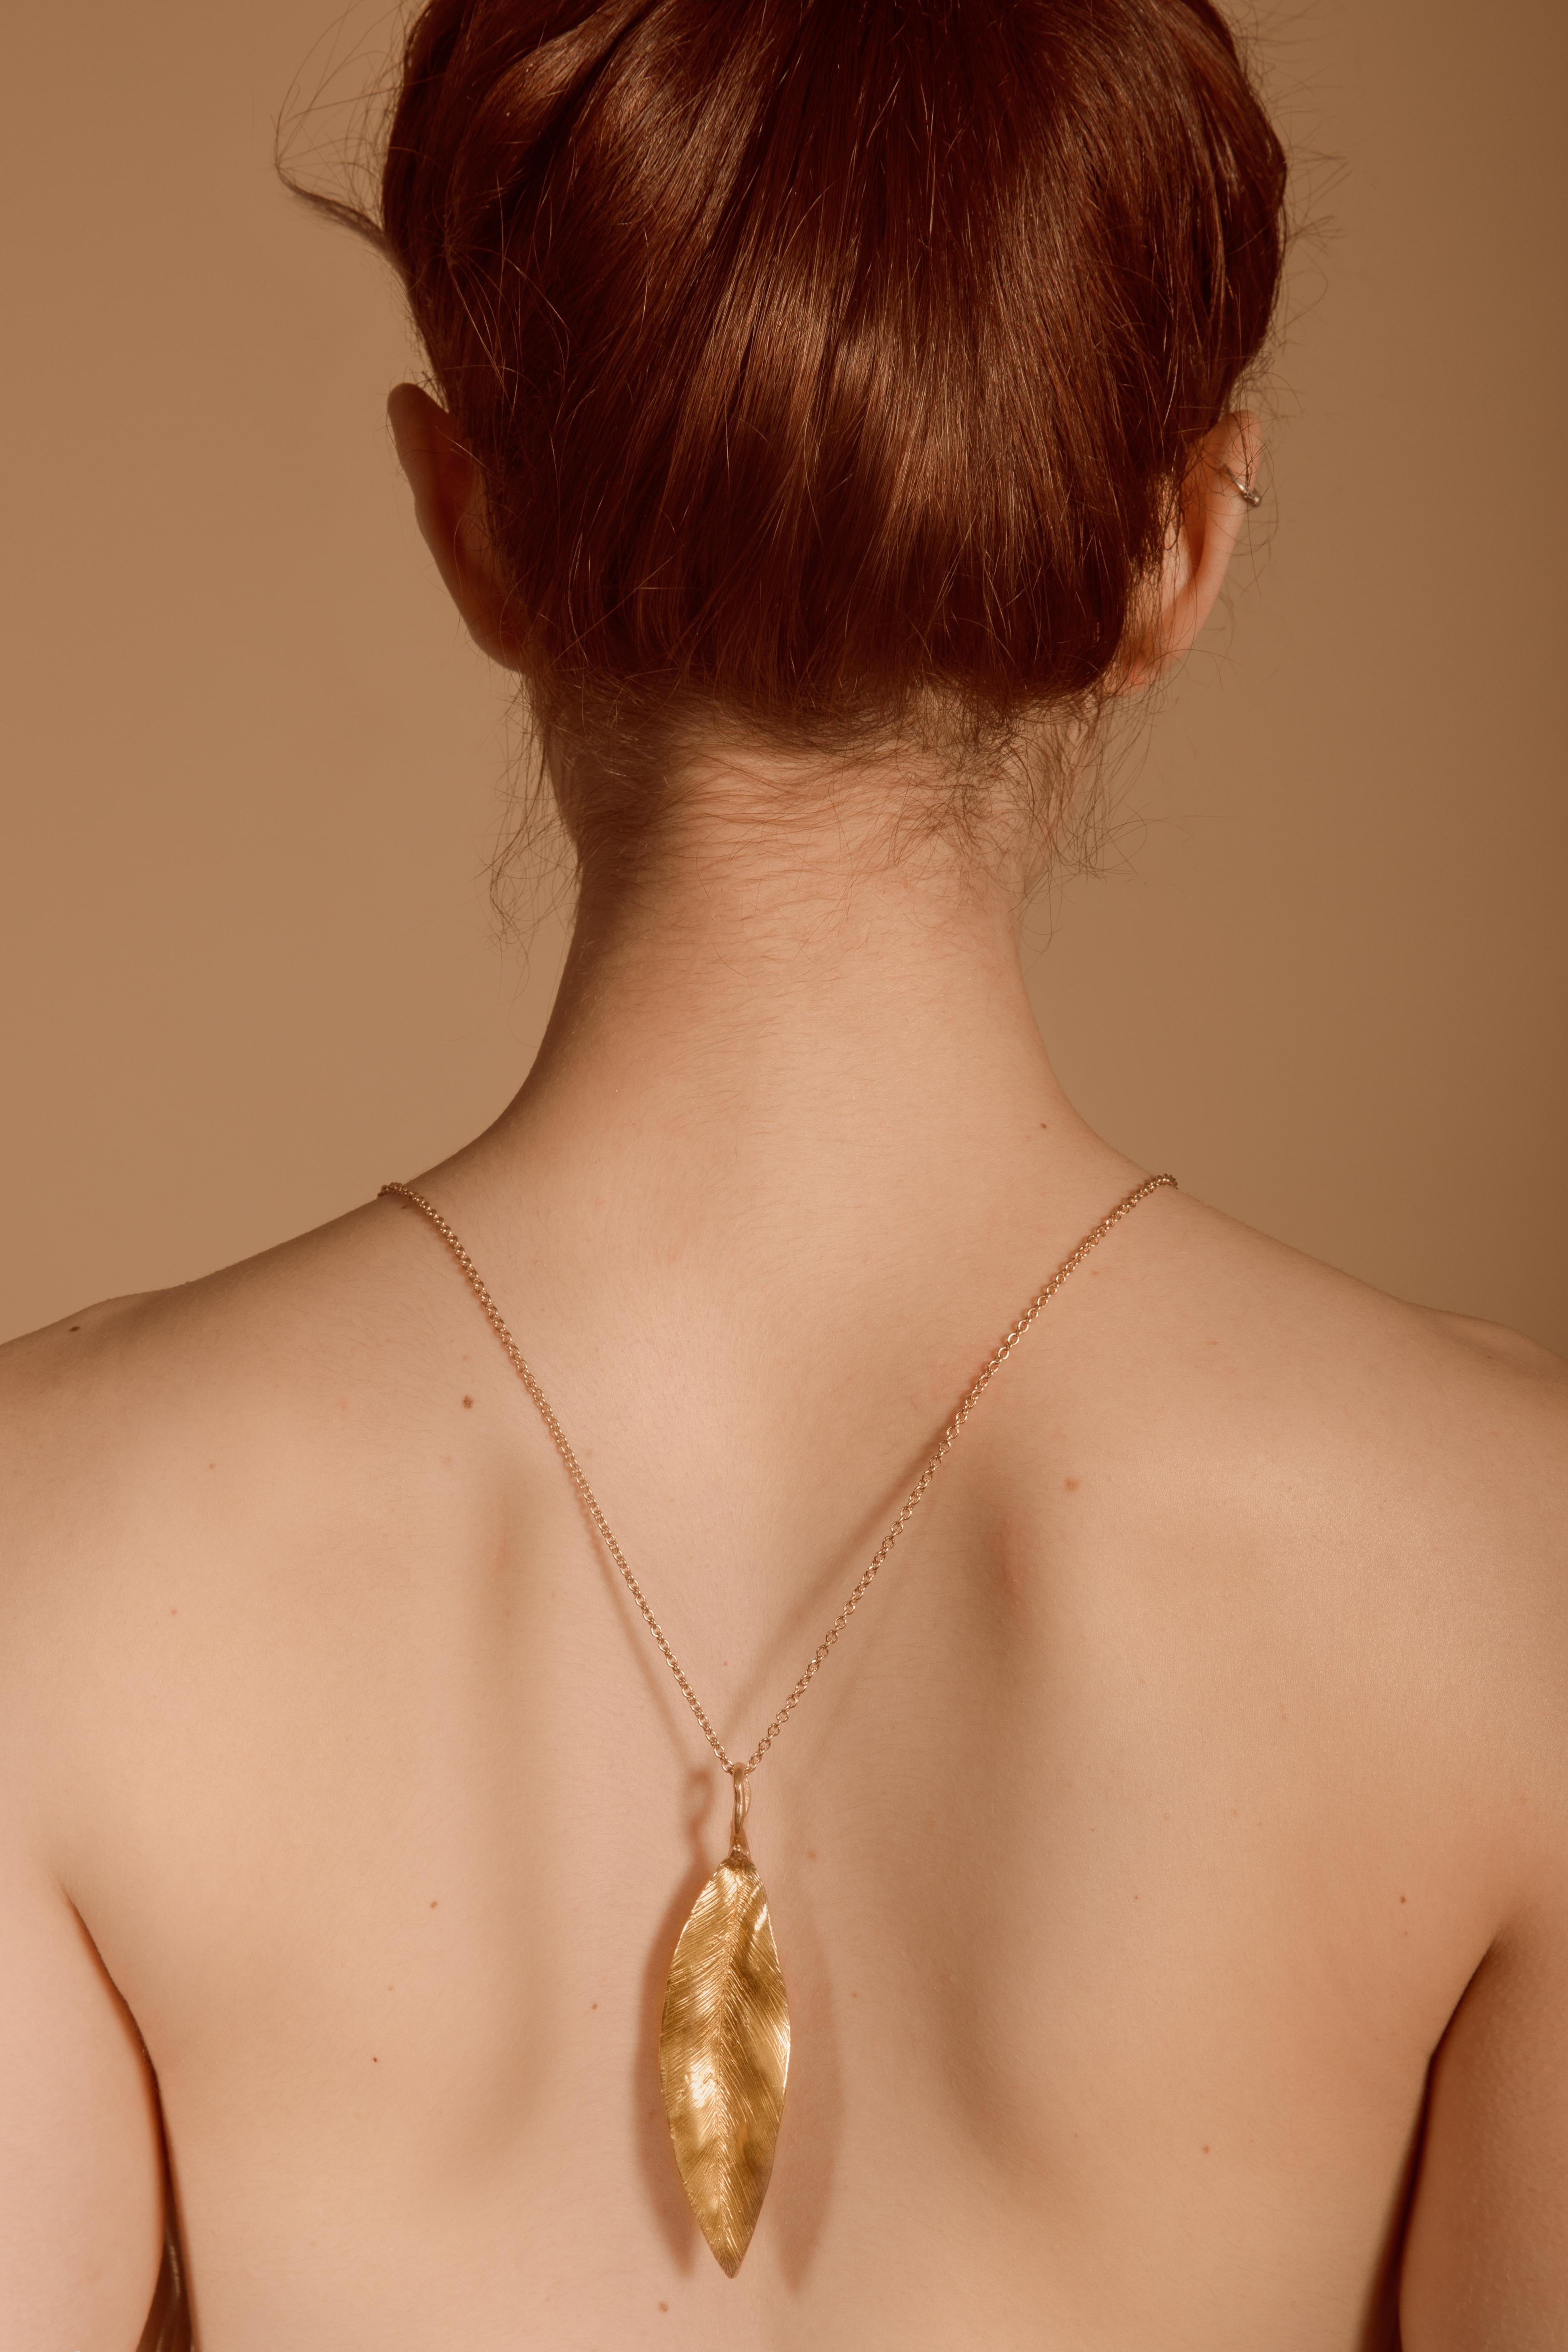 Giulia Barela Jewelry is handmade in the heart of Rome, Italy by master goldsmiths. All of our gold jewelry is unique. No two pieces are exactly the same because they are all handmade in gold. Giulia Barela designs her jewelry based on the beauty of